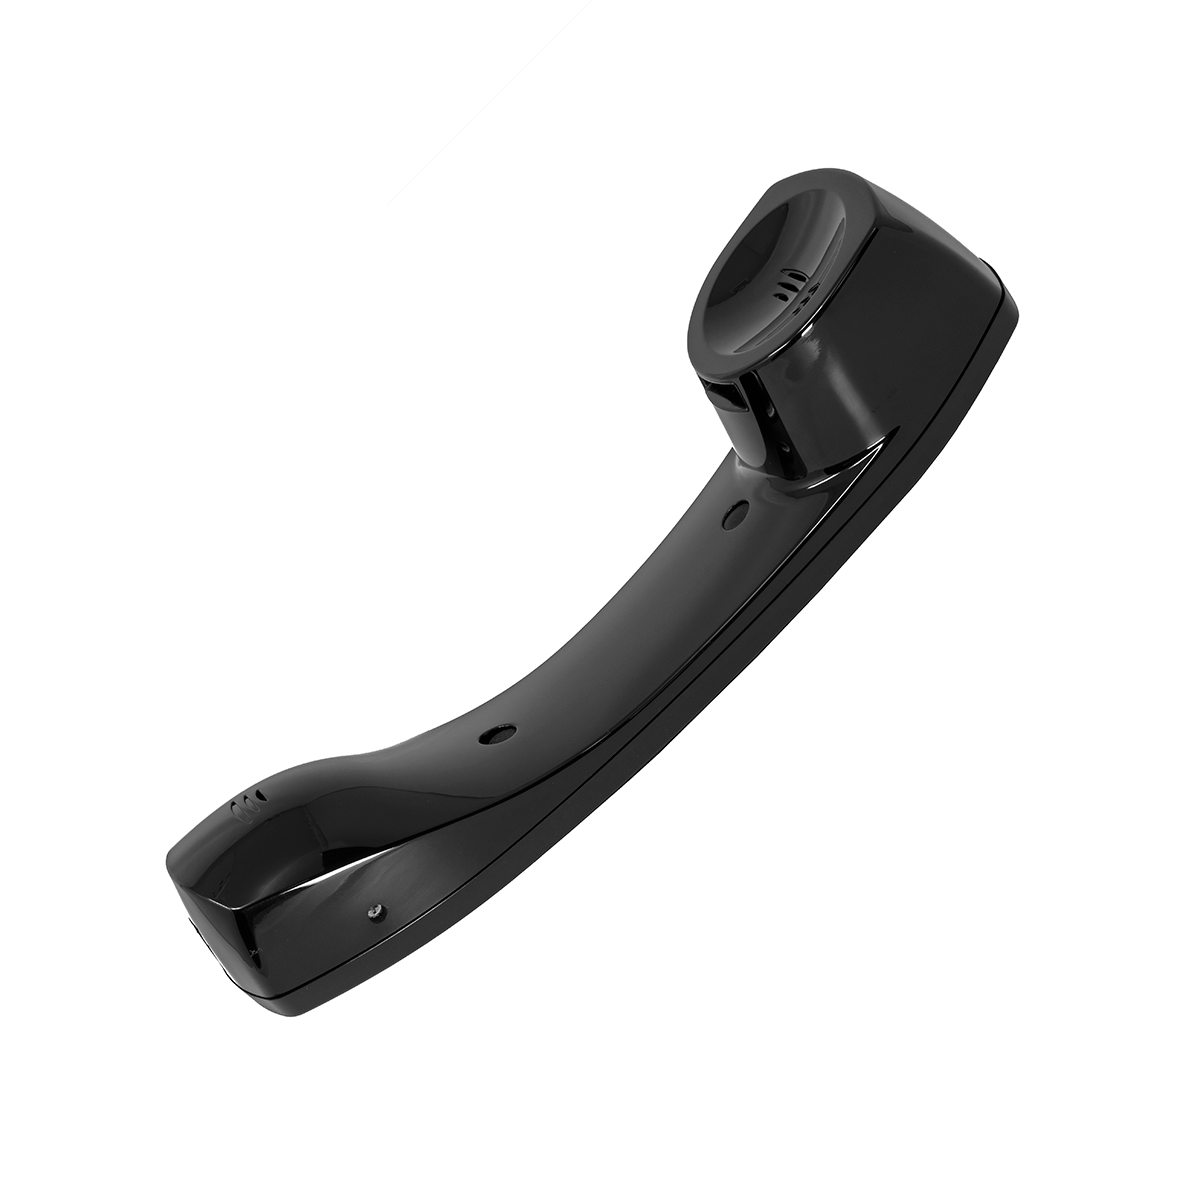 Noise-Cancelling Handset (Right Side View)